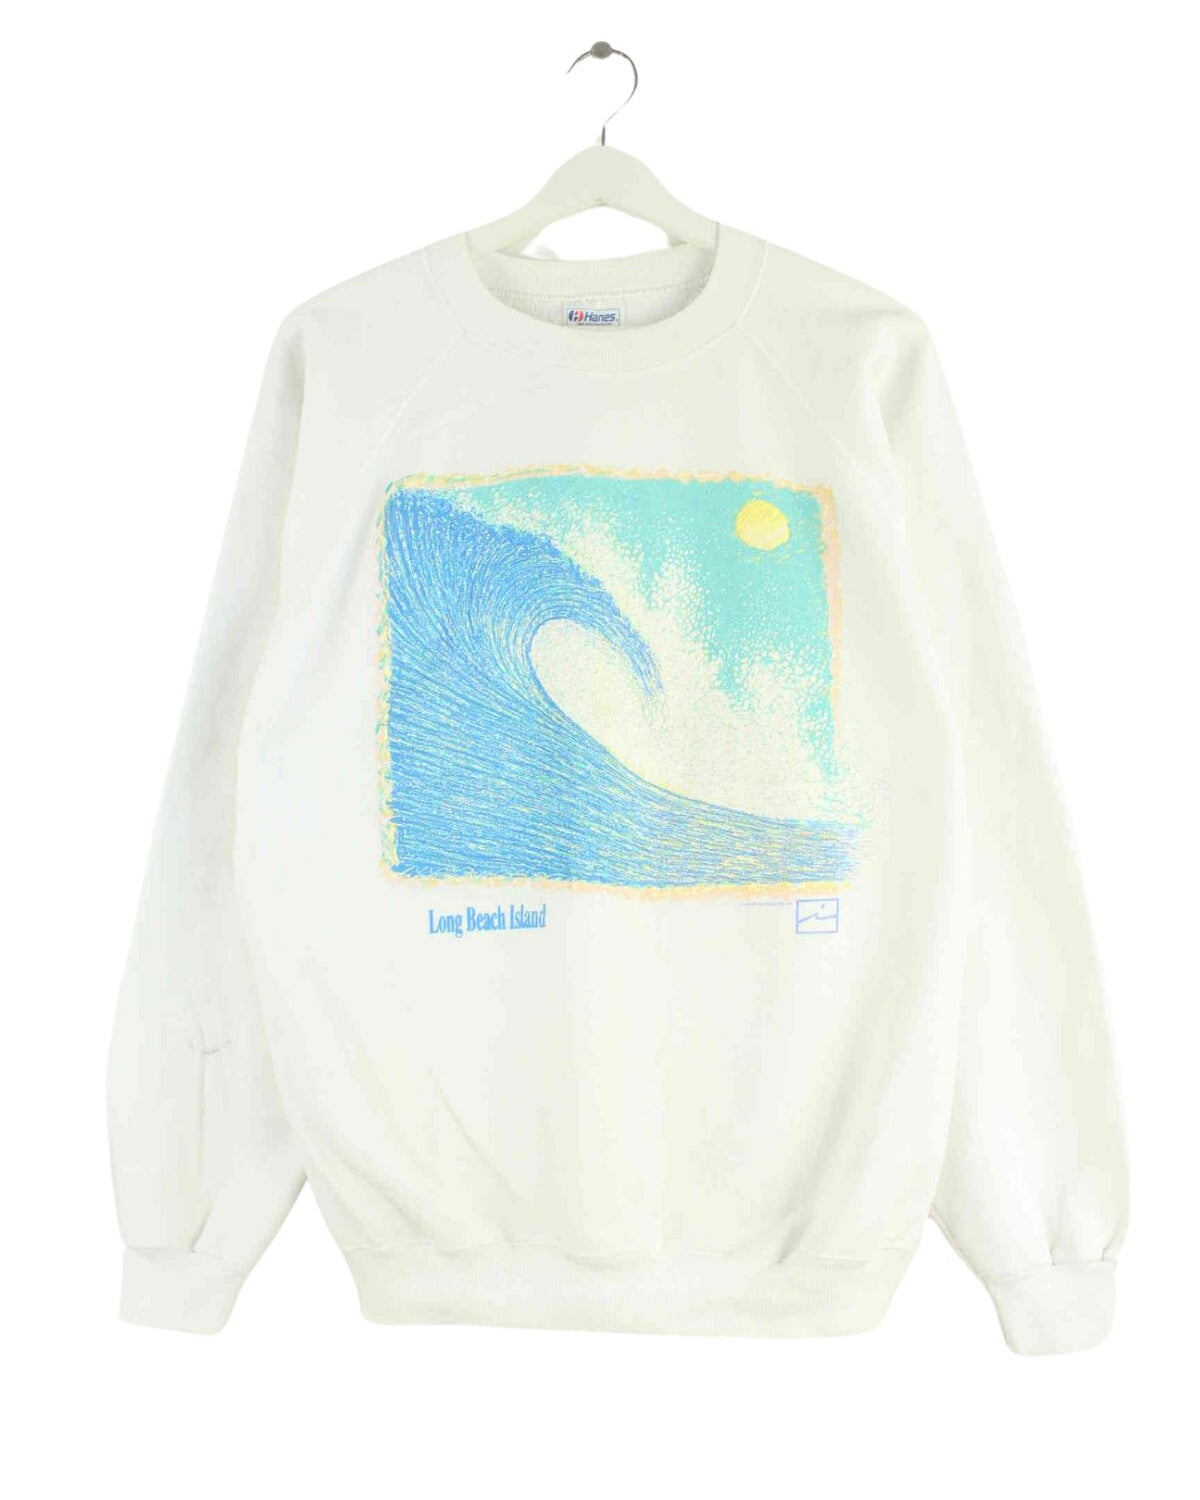 Hanes Vintage 1990 Long Beach Island Sweater Weiß L (front image)